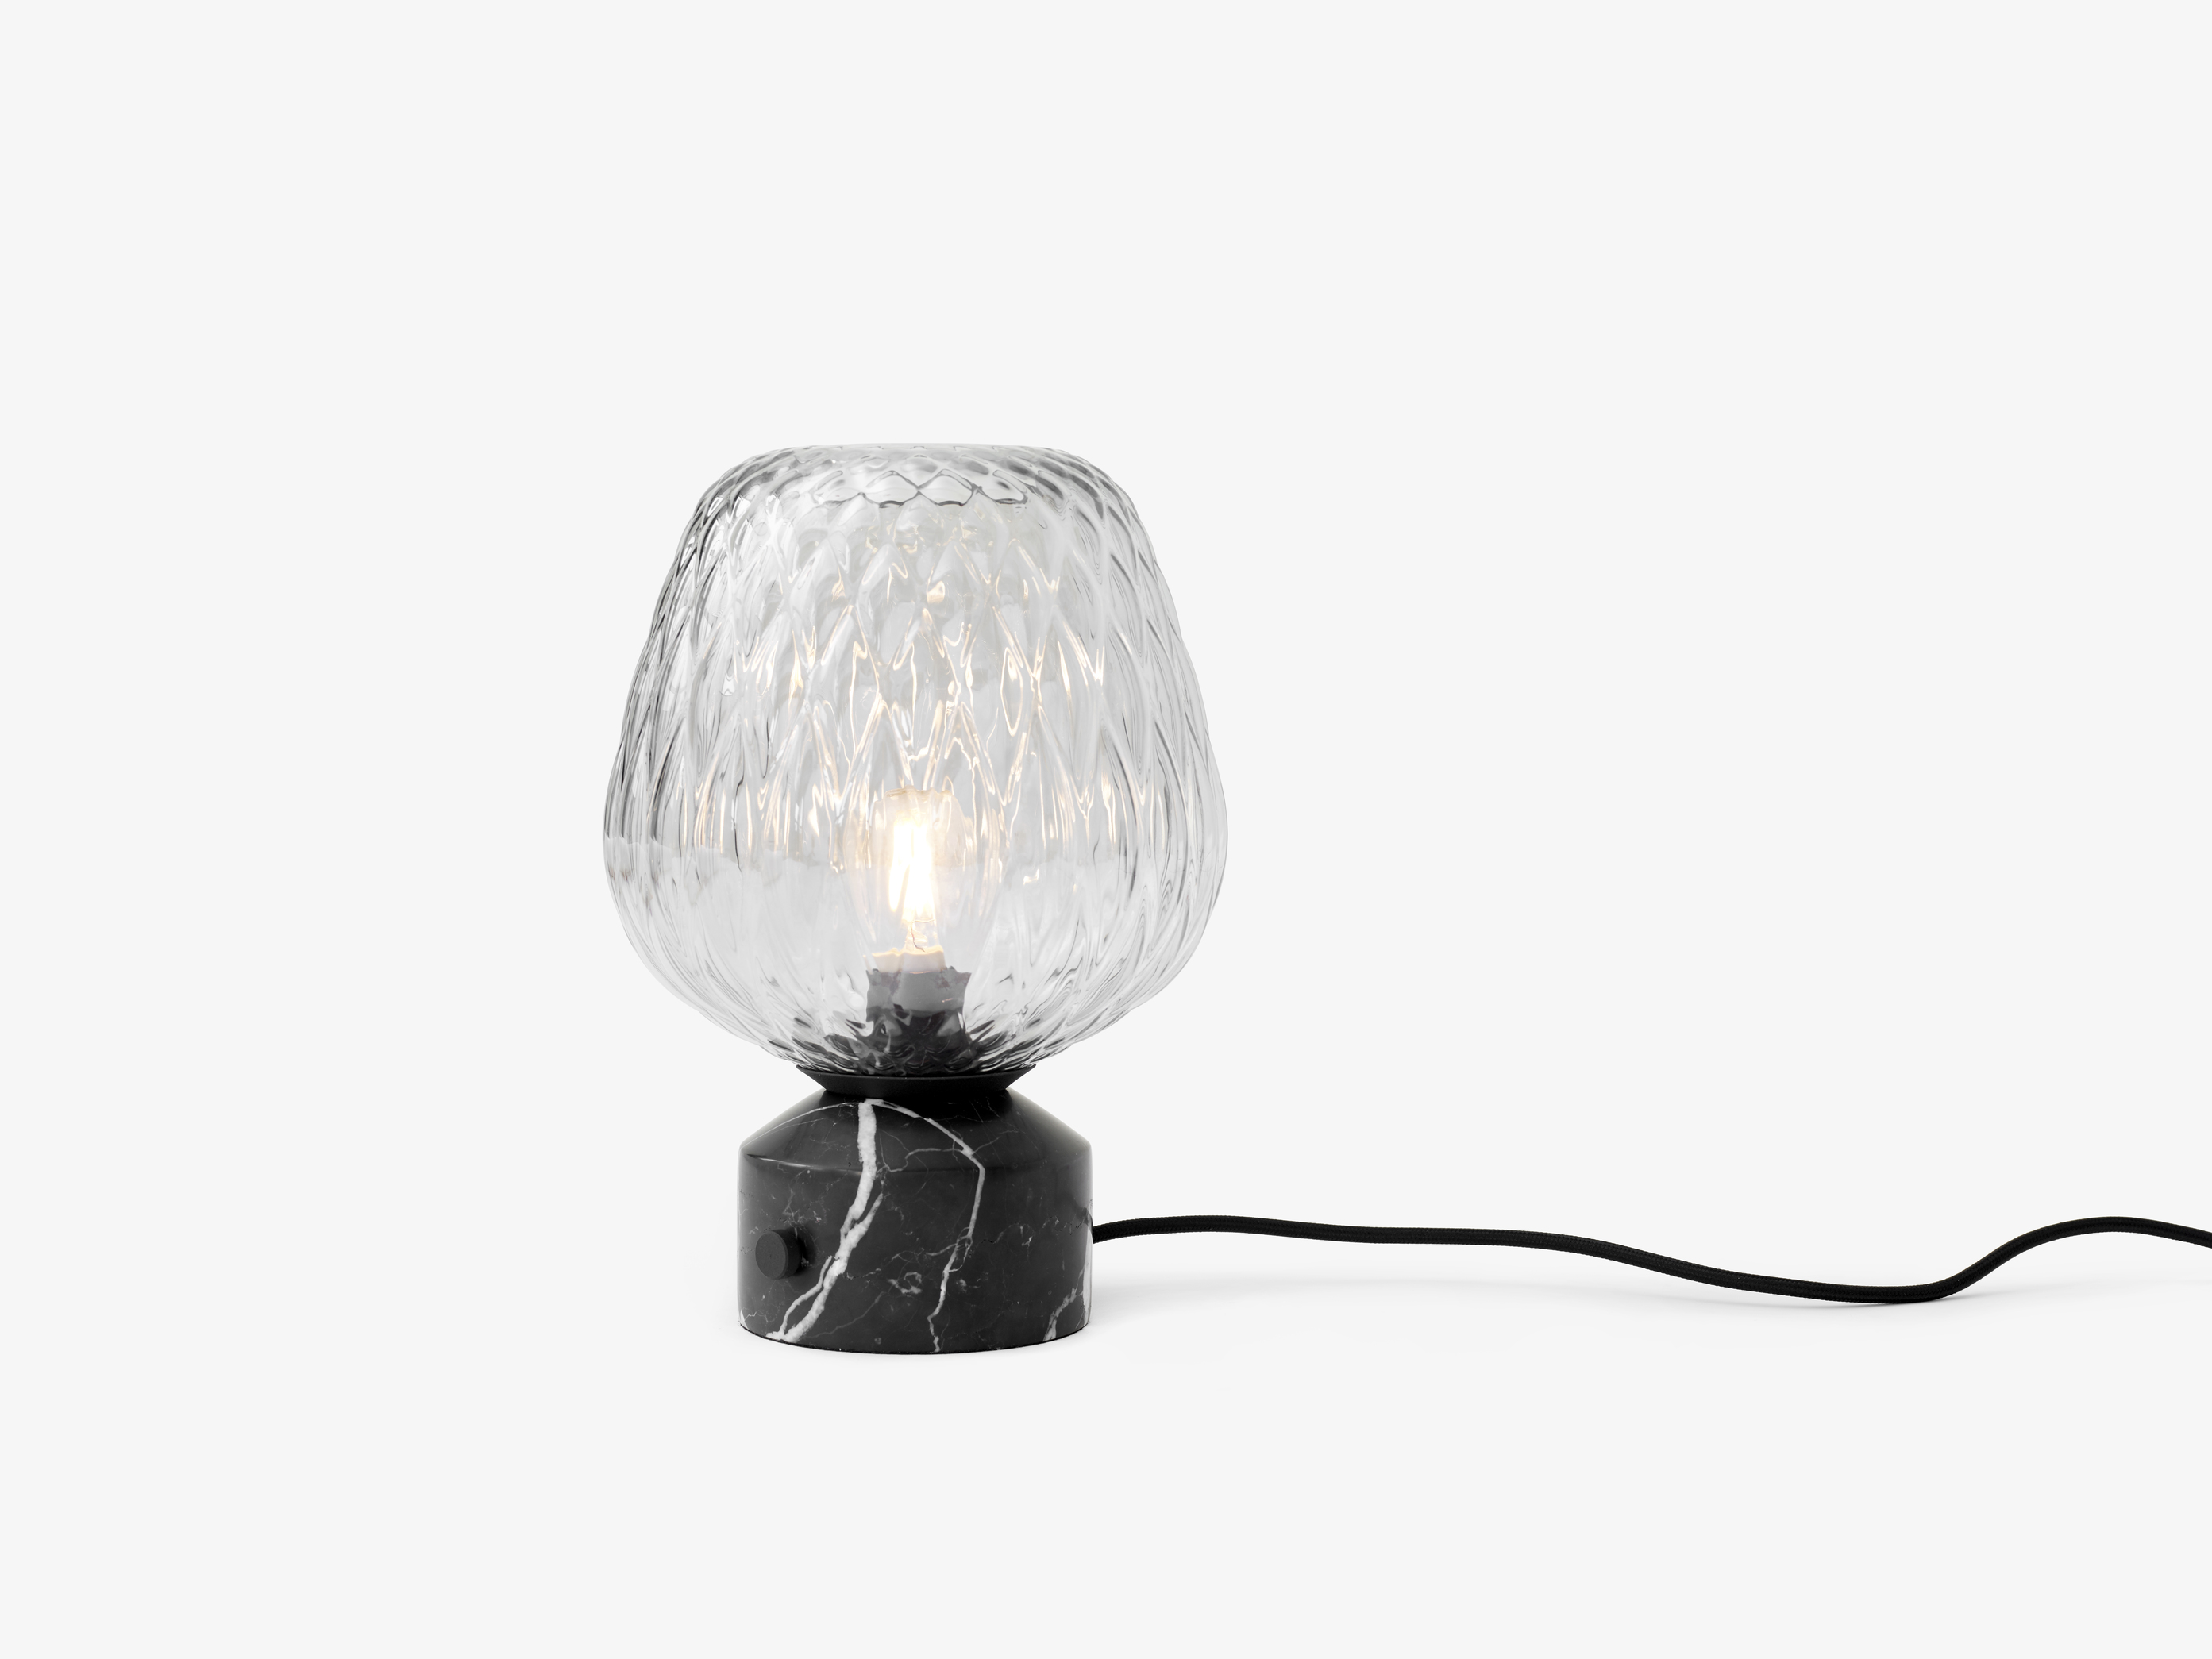 &Tradition Blown Table Lamp SW6